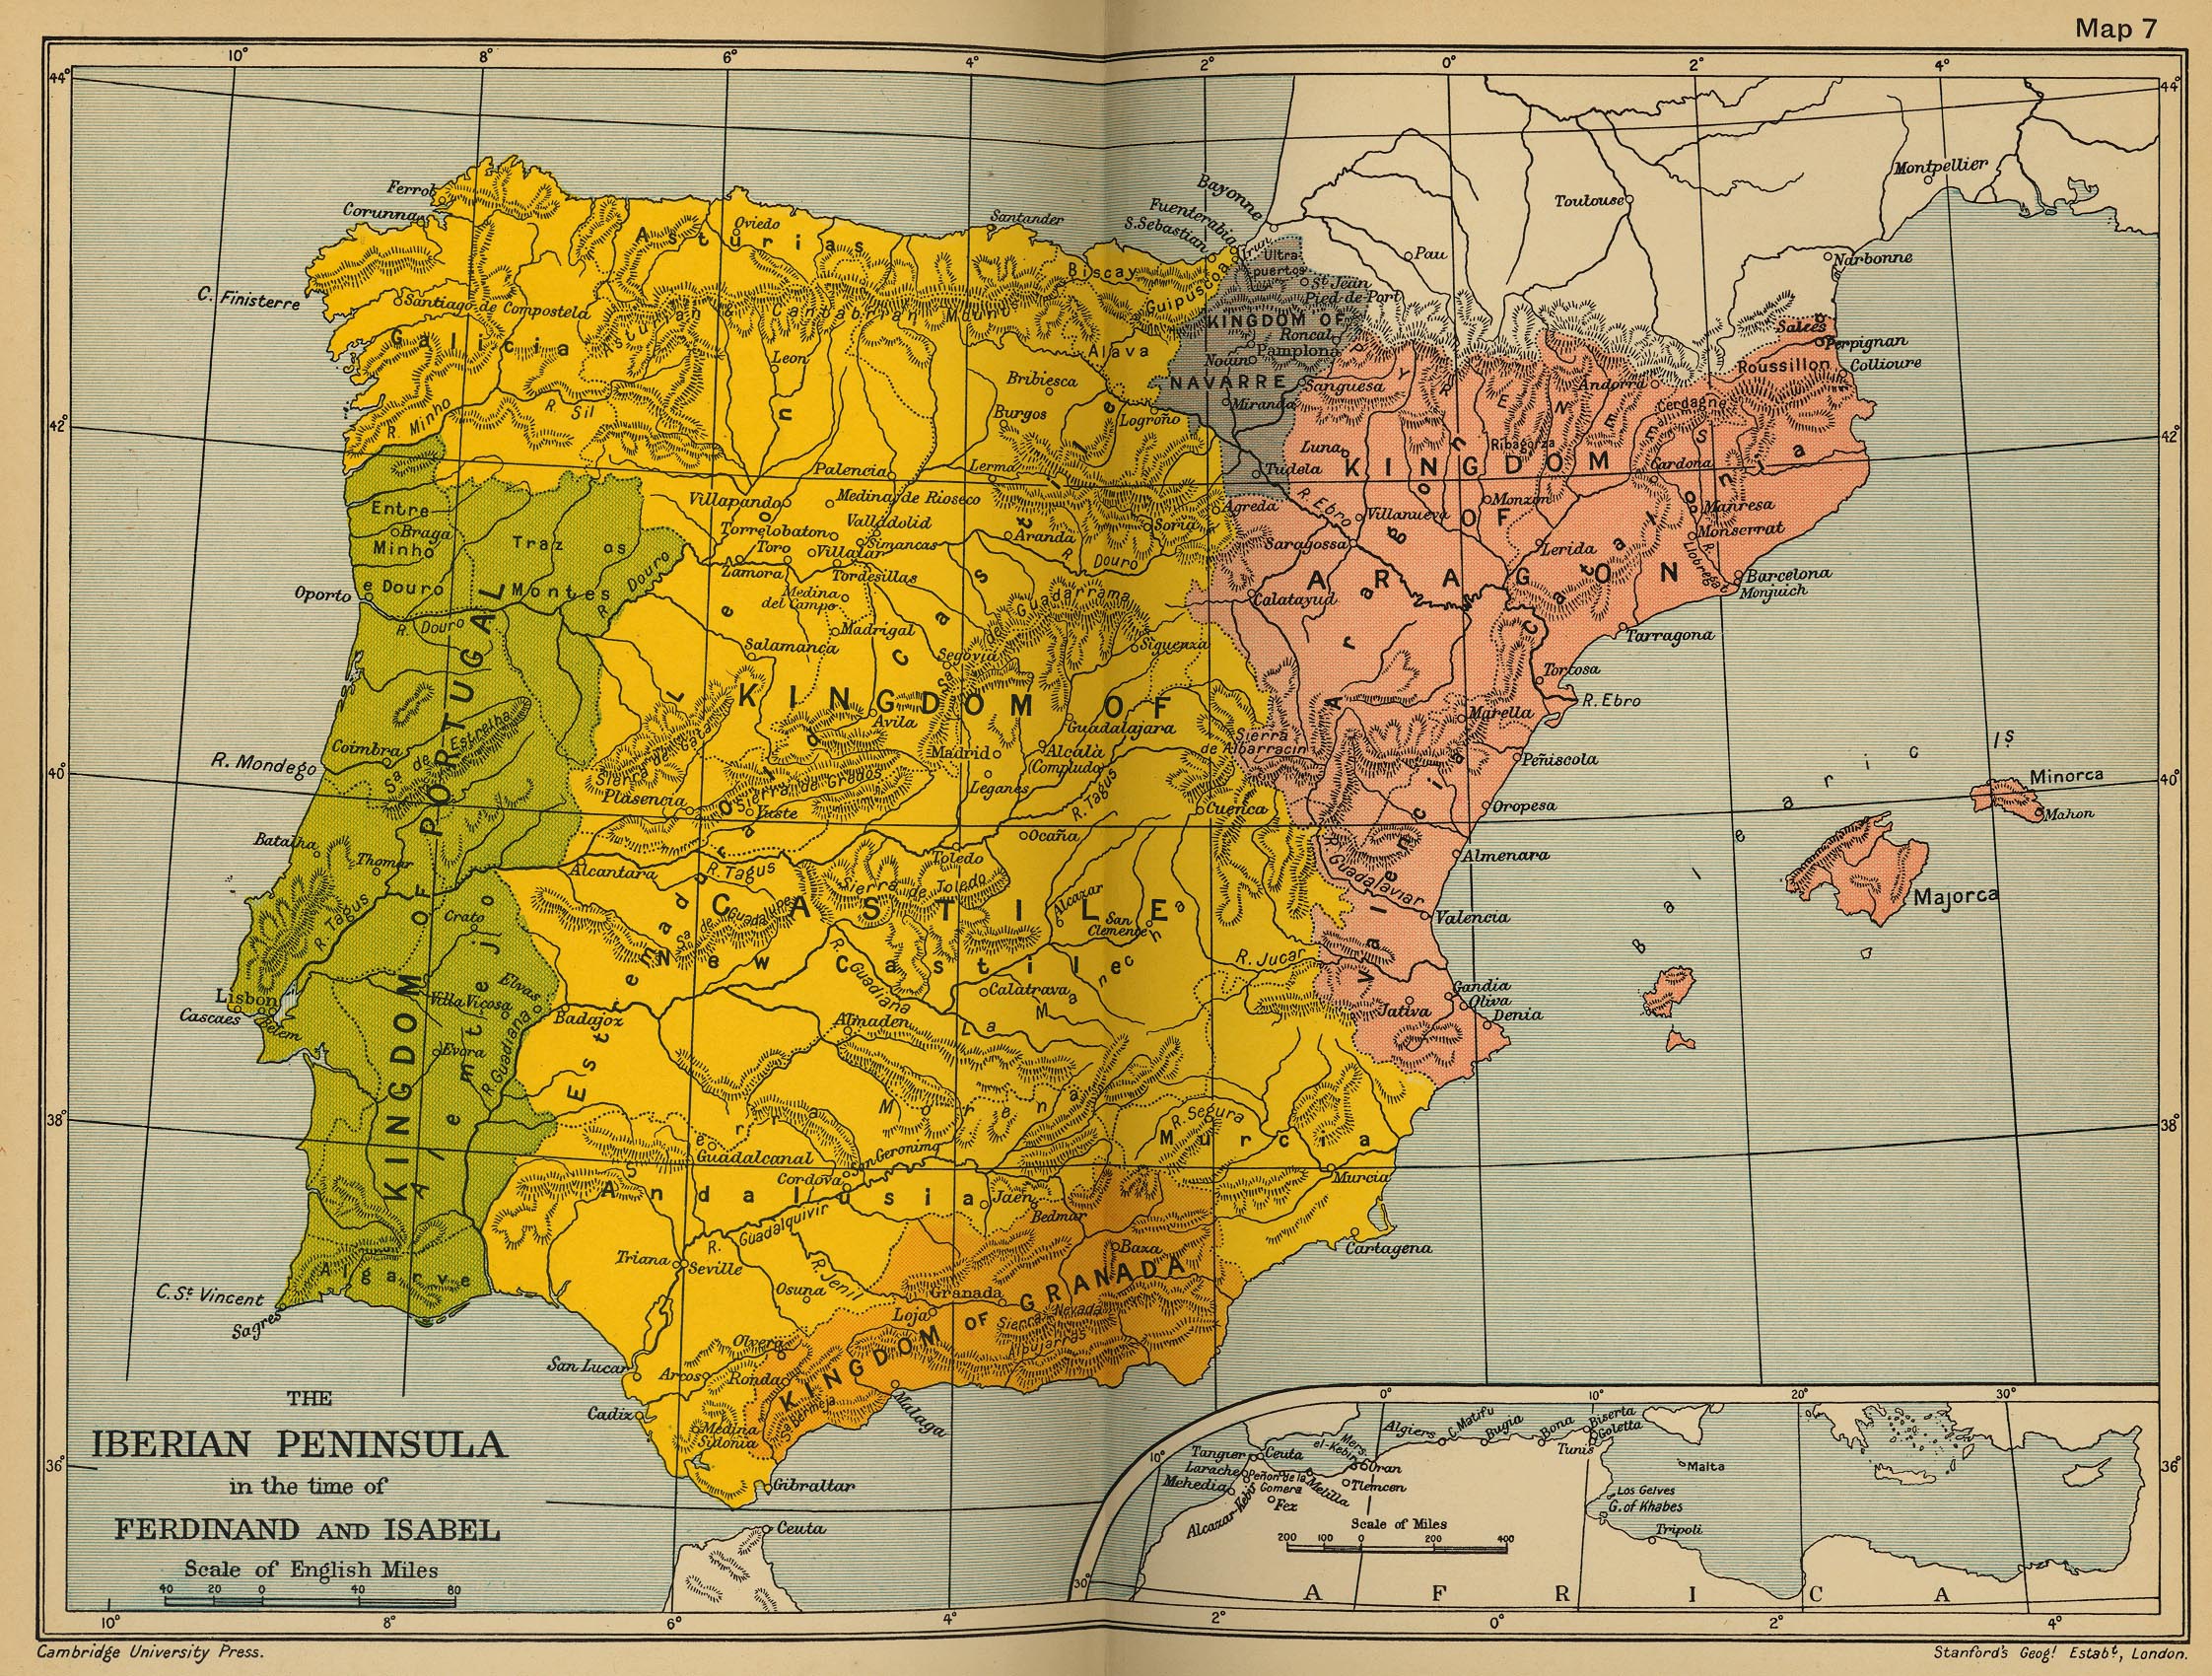 Map of the Iberian Peninsula in the time of Ferdinand and Isabel, 1479-1504